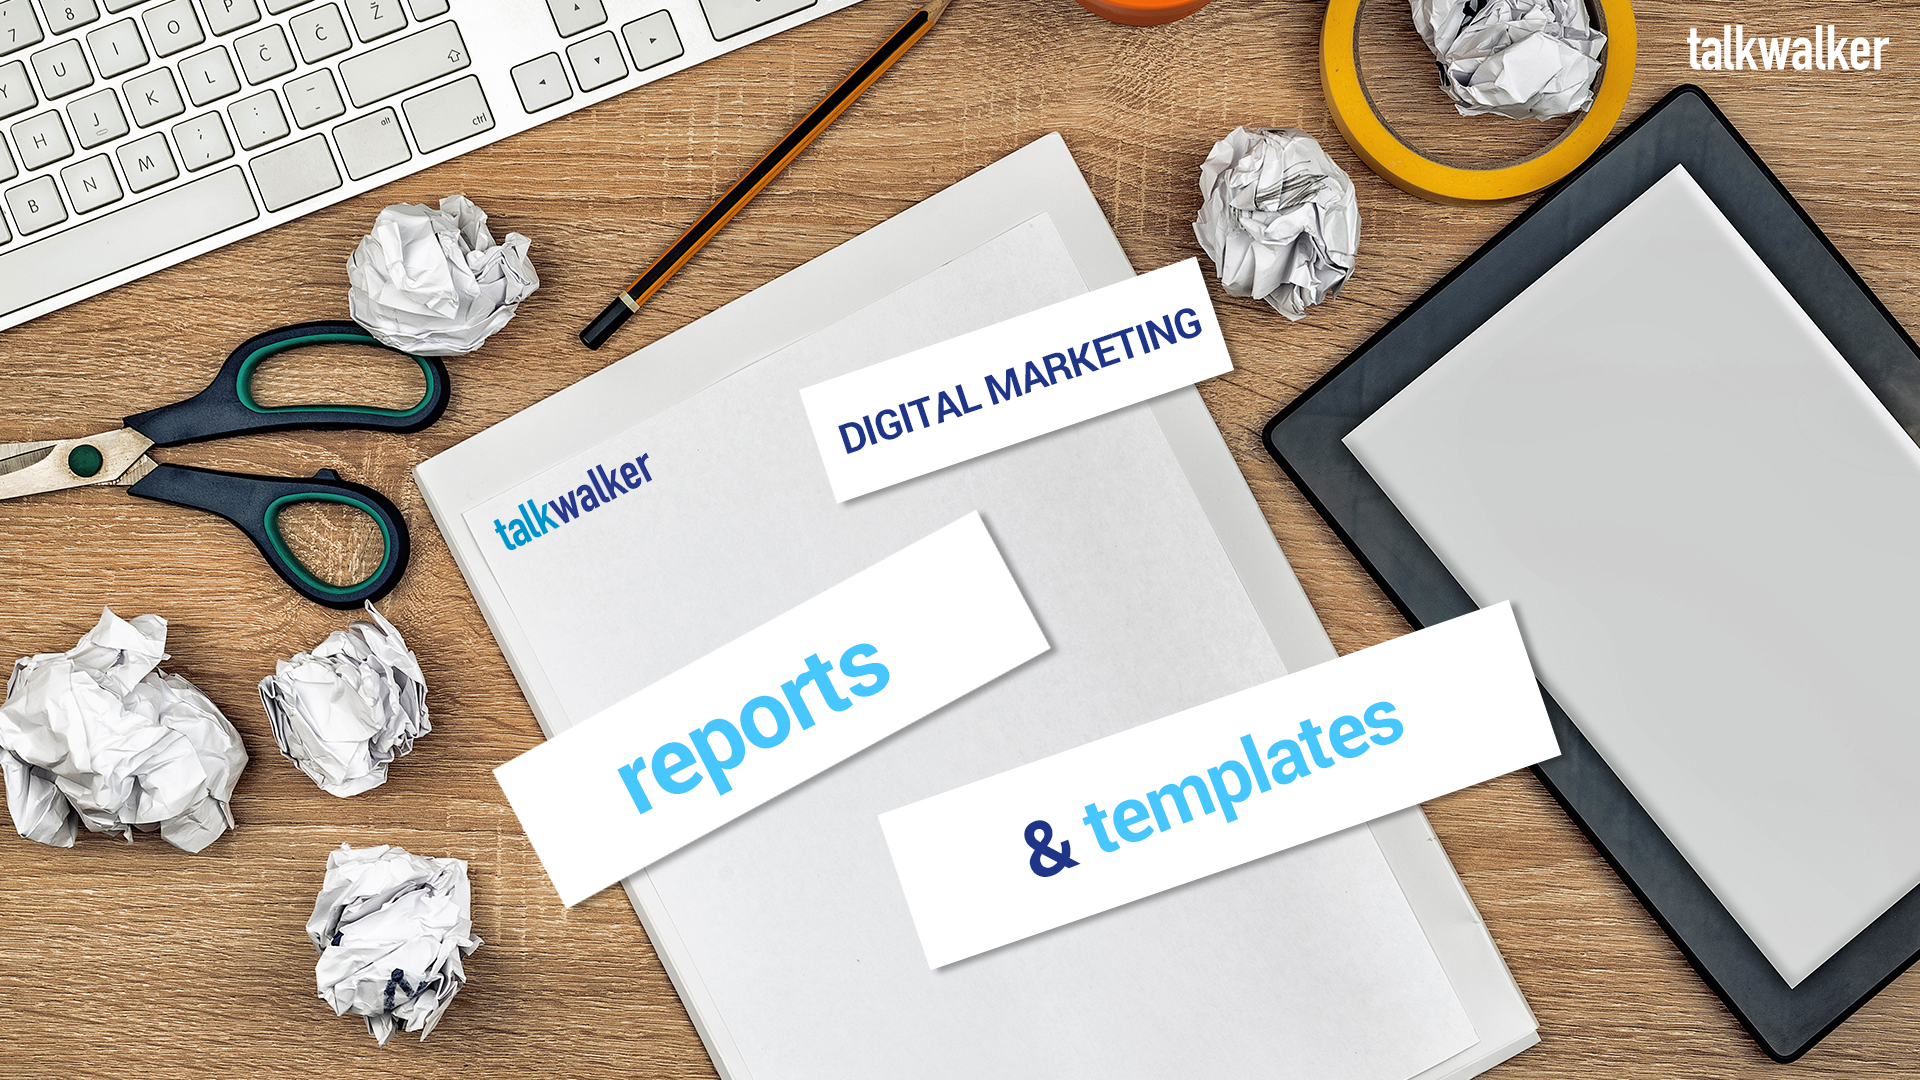 Digital marketing reports and templates